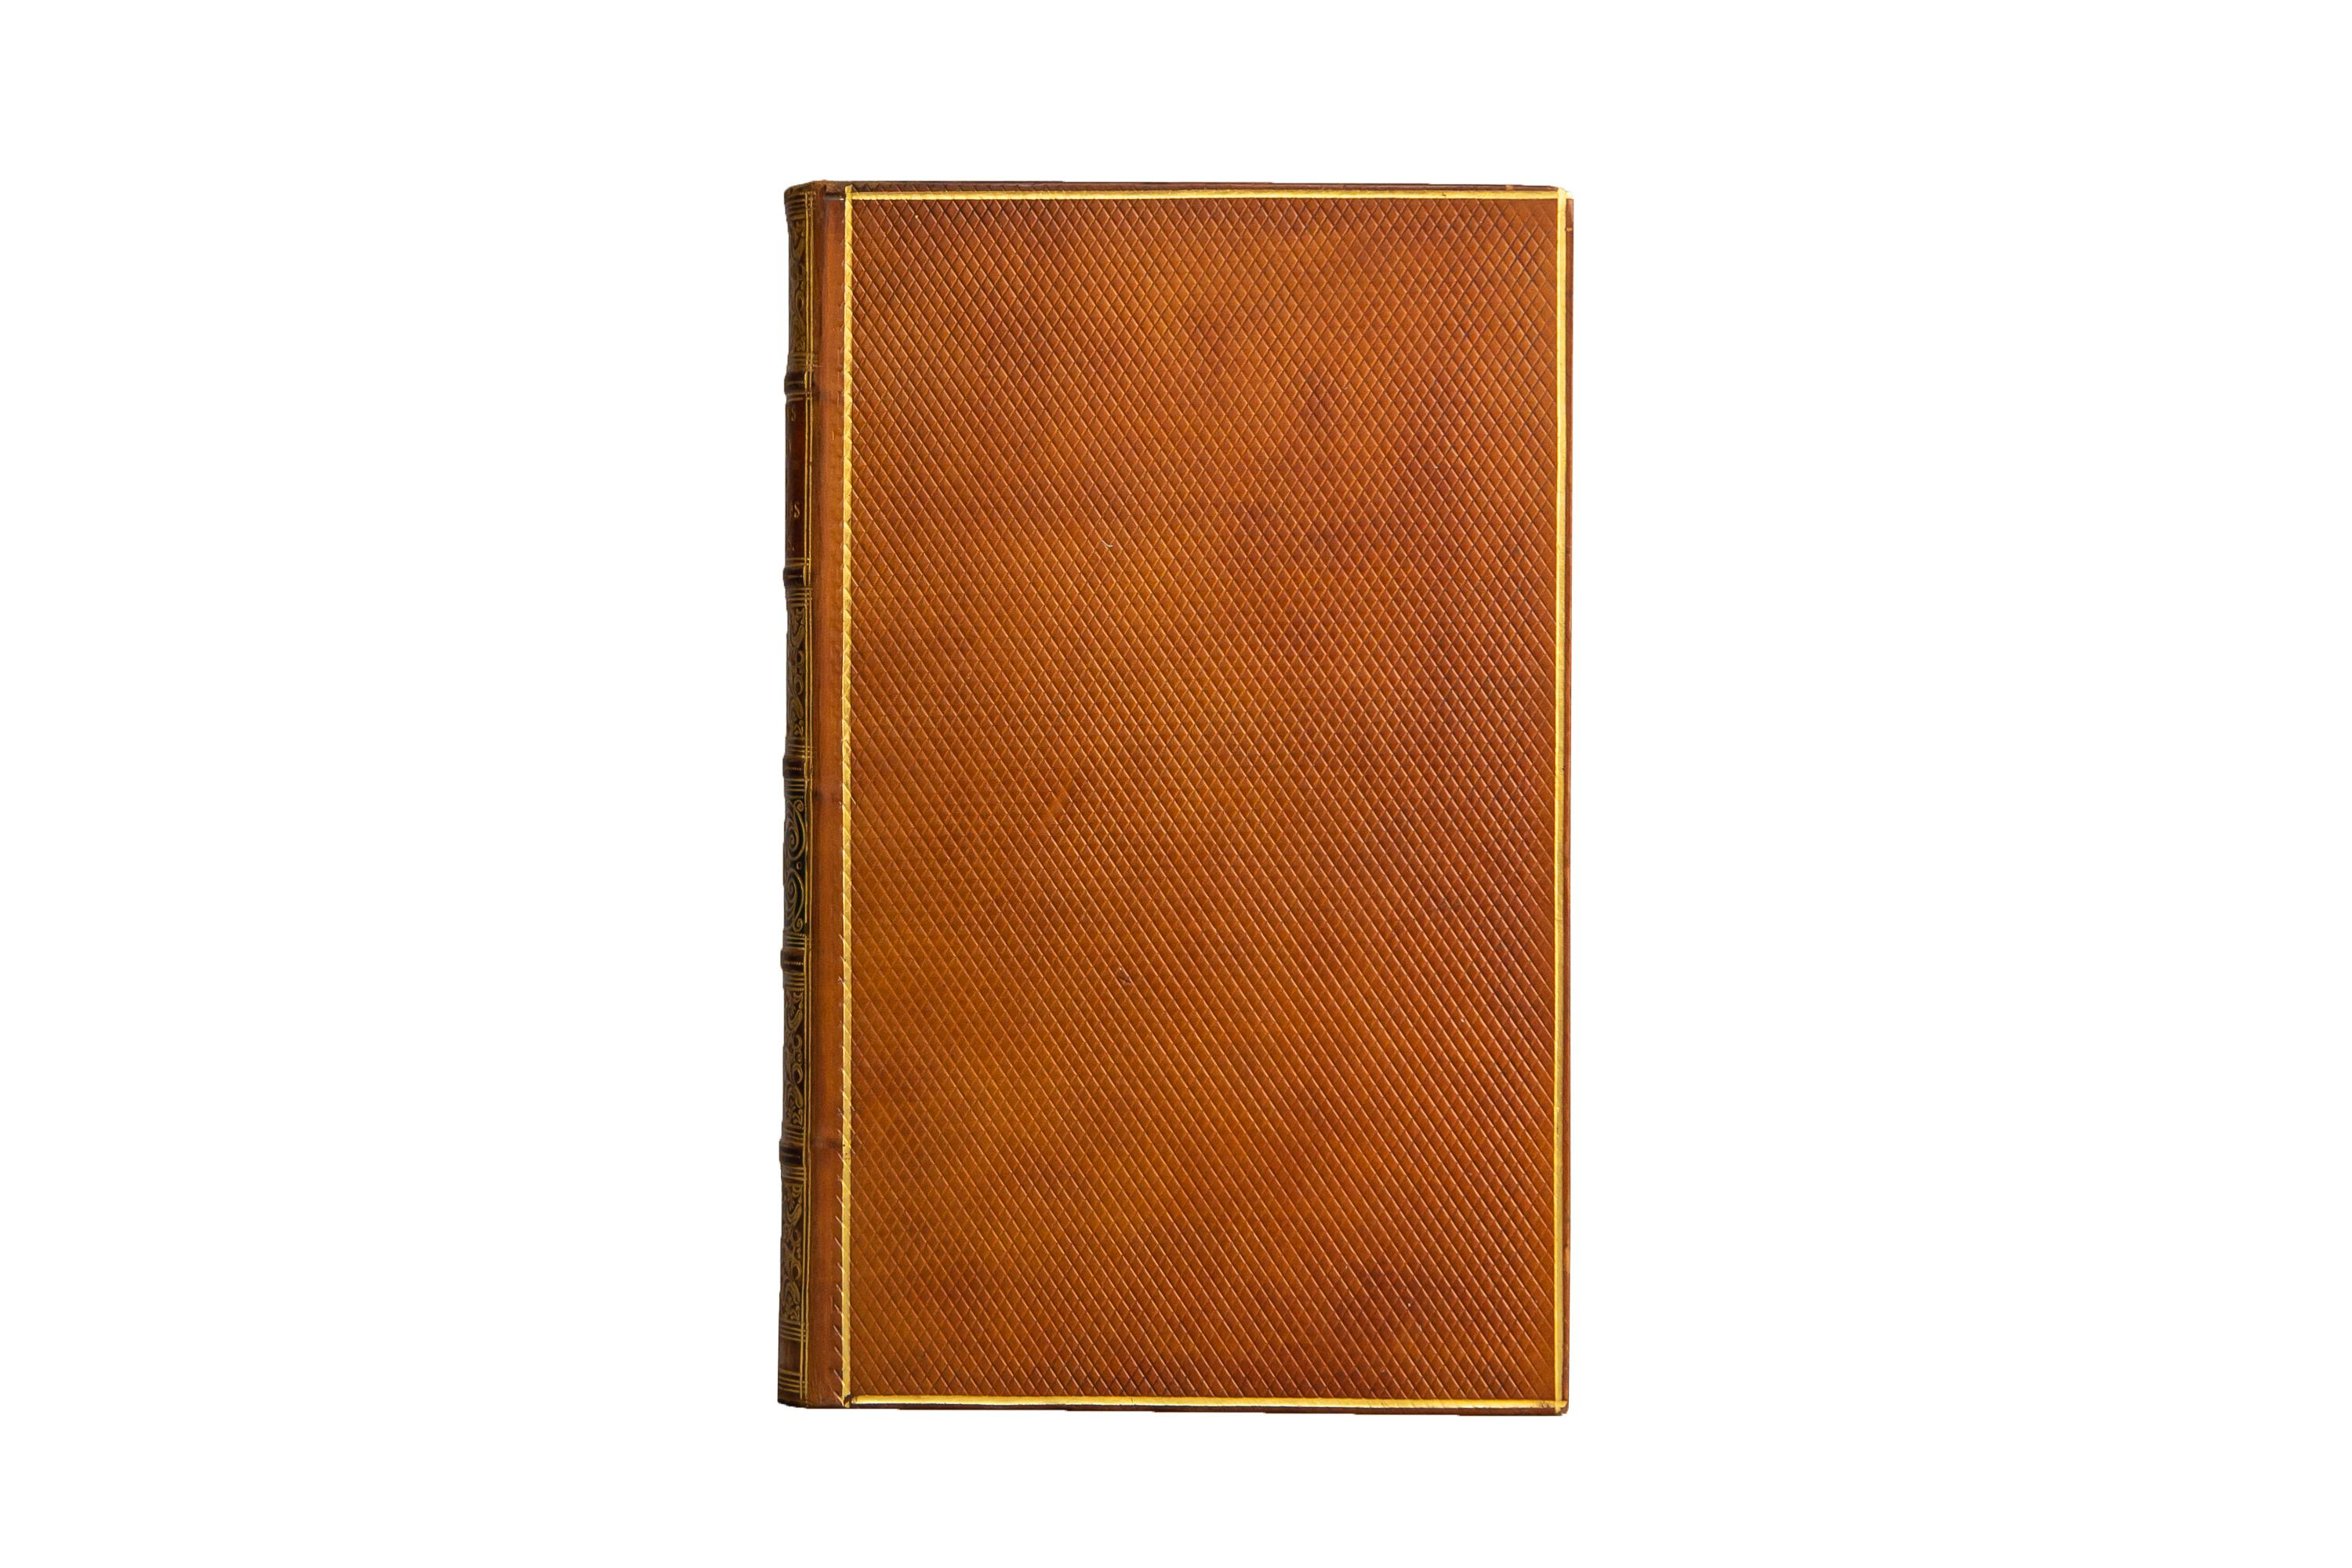 4 Volumes. James Browne, A History of the Highlands and of the Highland Clans. First Edition. Bound in full tan calf with diced boards bordered in gilt. Raided band spines with panels displaying beautifully ornate floral detailing and labels in tan